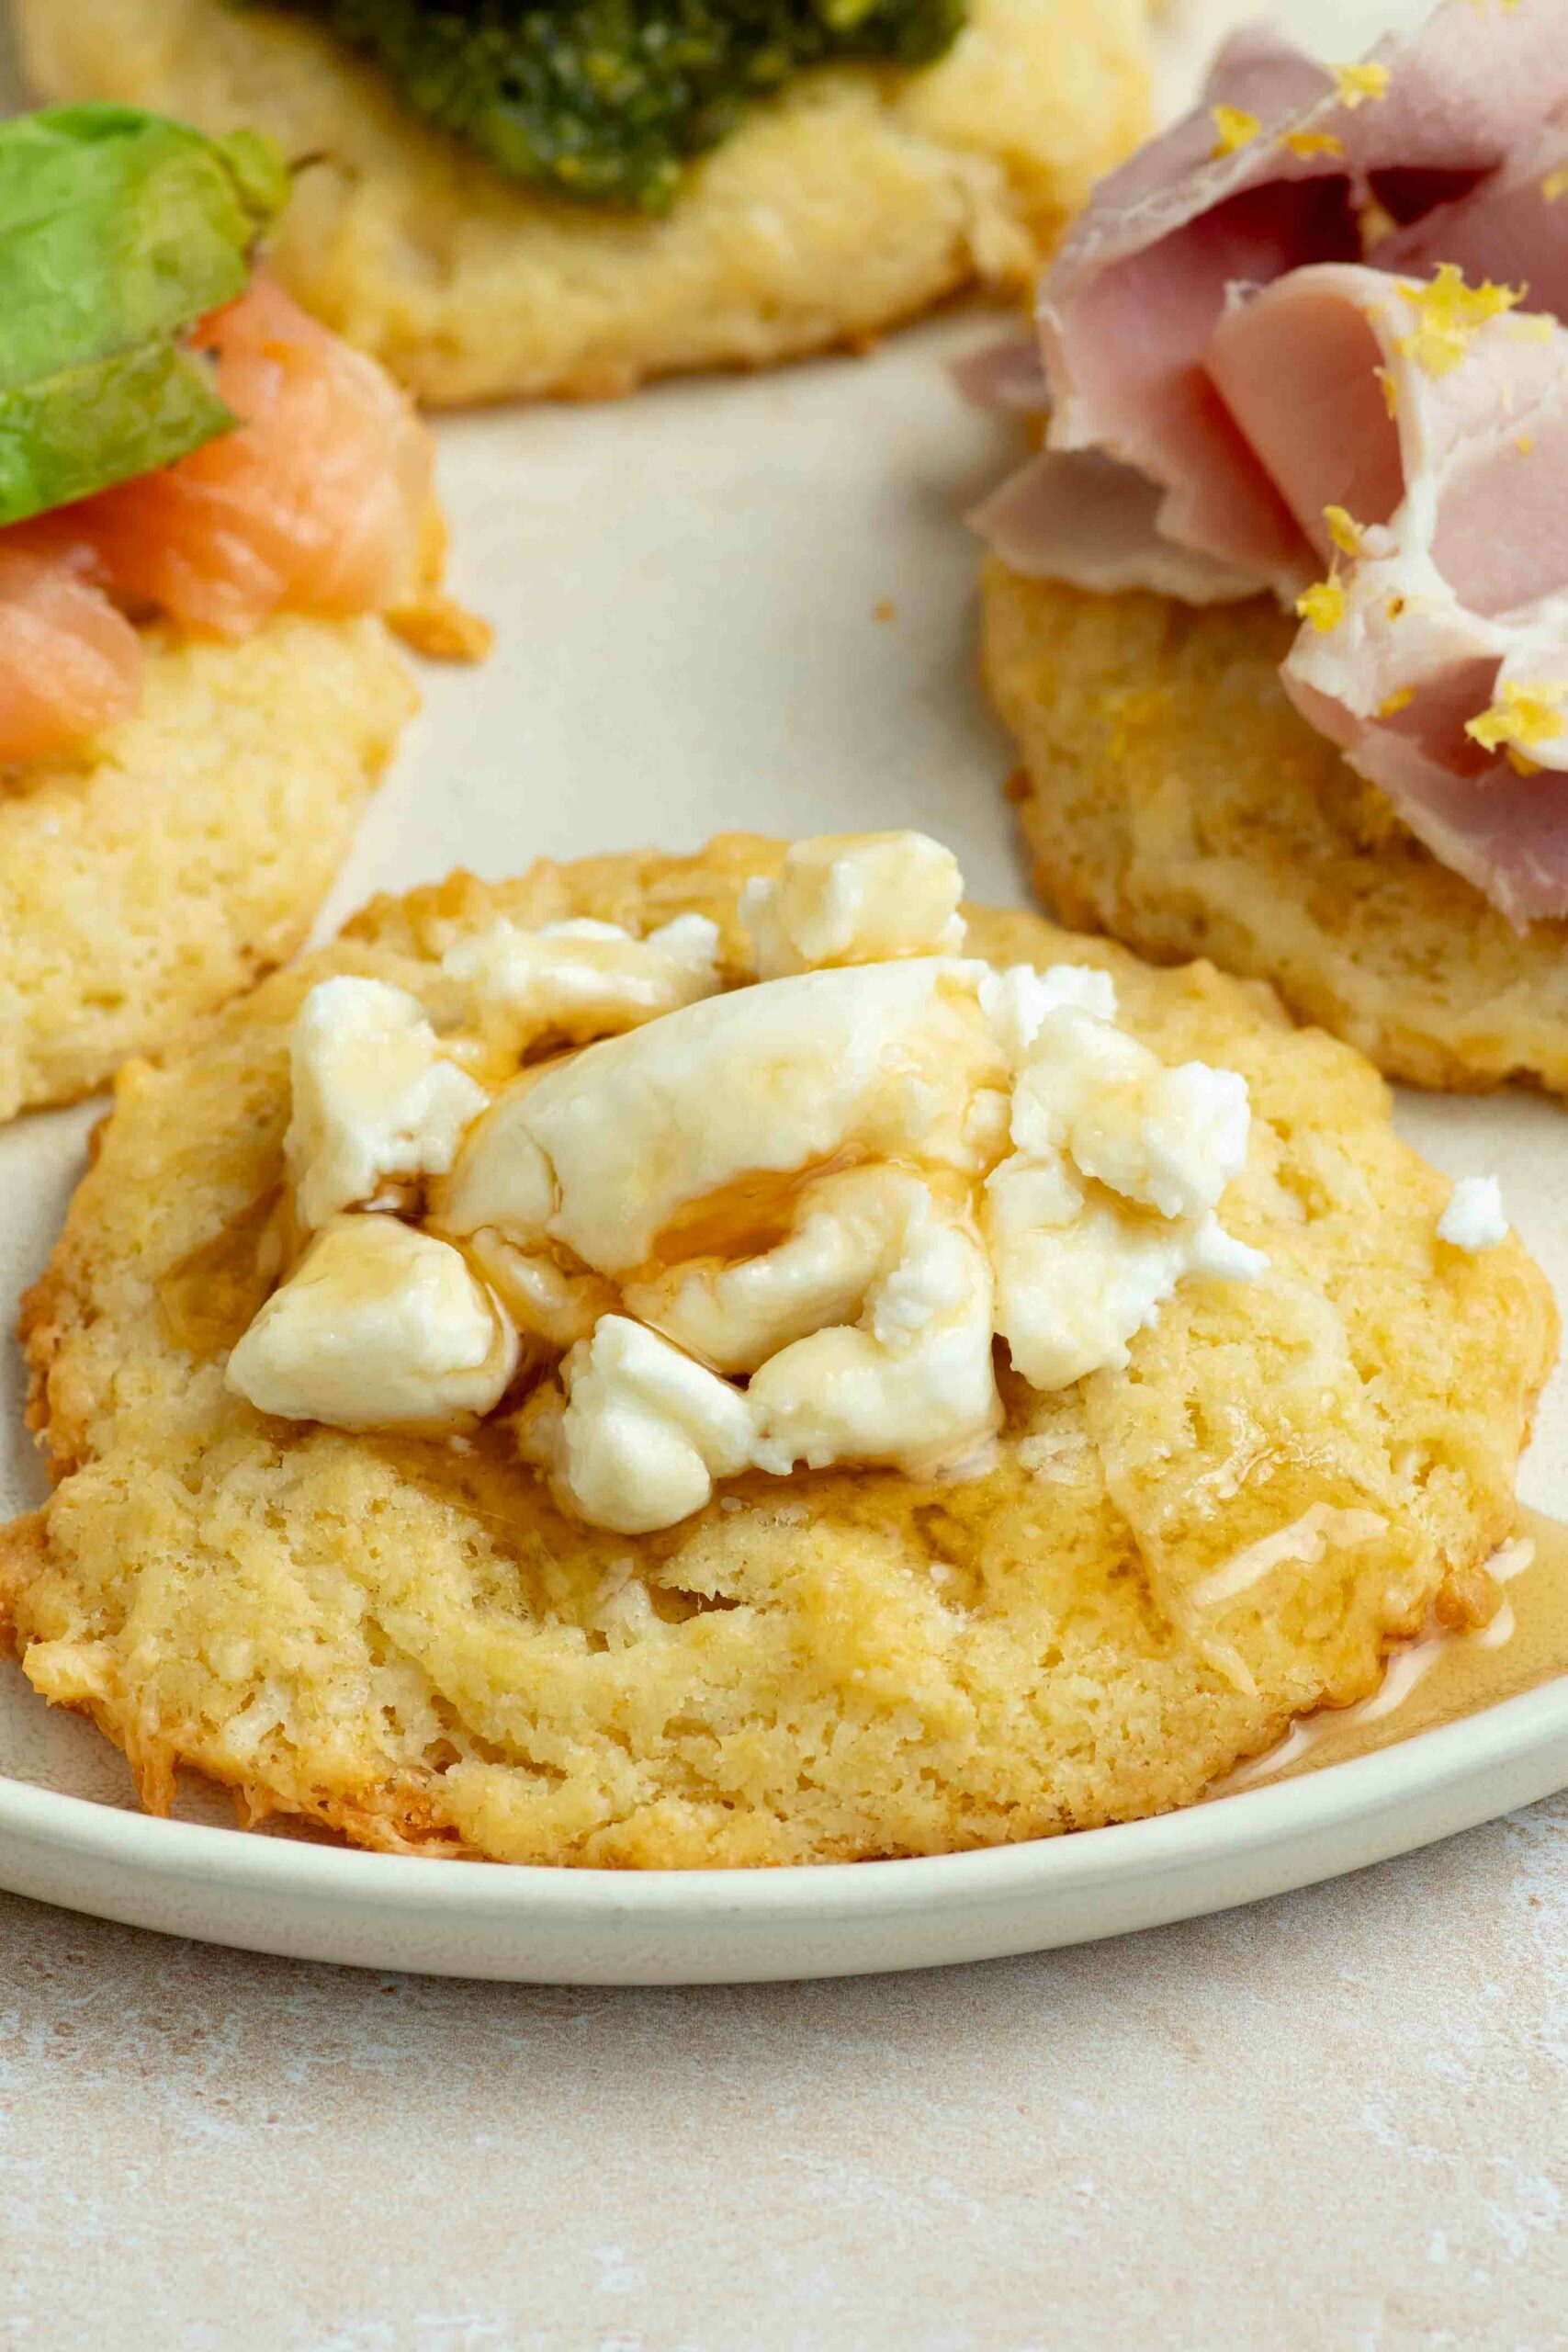 A cookie placed on a plate and garnished with chunks of goat cheese and a drizzle of honey.